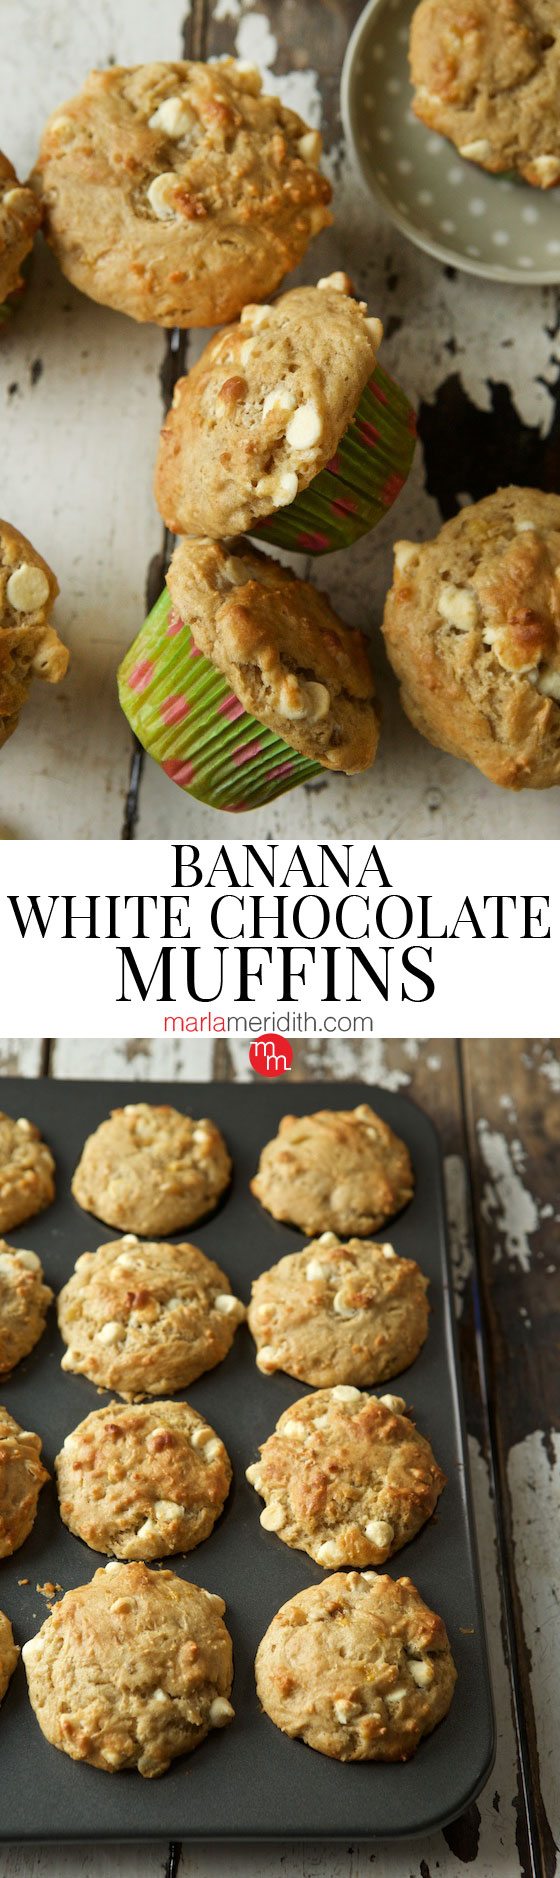 Banana White Chocolate Chip Muffins recipe. From start to finish in just 30 minutes! MarlaMeridith.com #baking #muffins #recipe #chocolate 